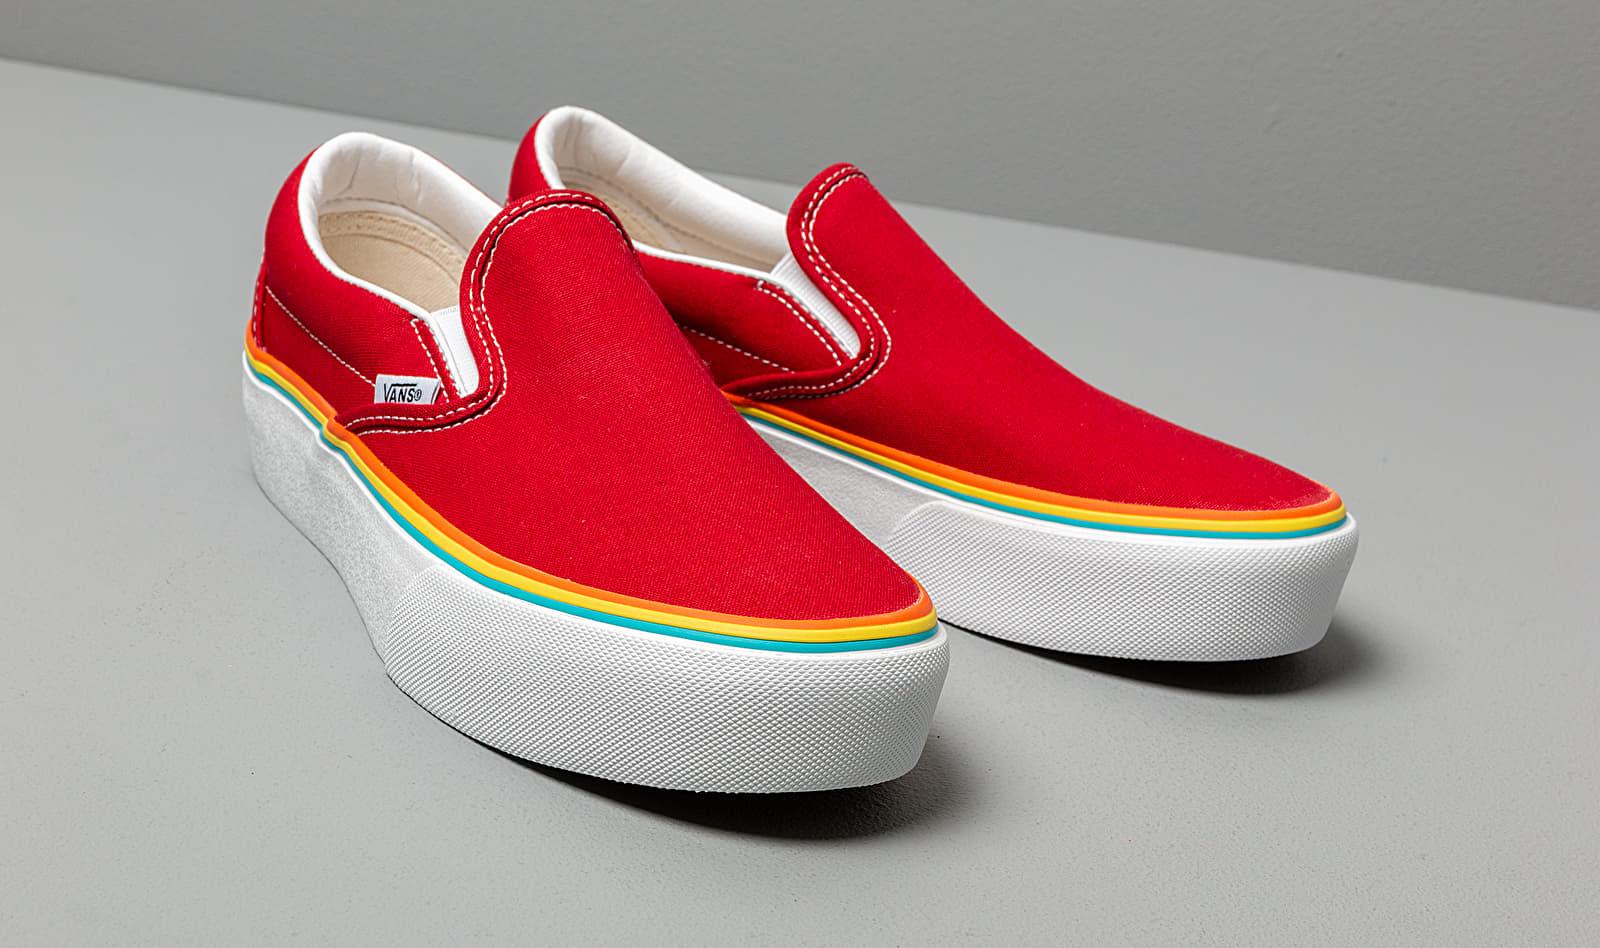 Vans Ua Classic Slip-on Trainers in Red - Lyst